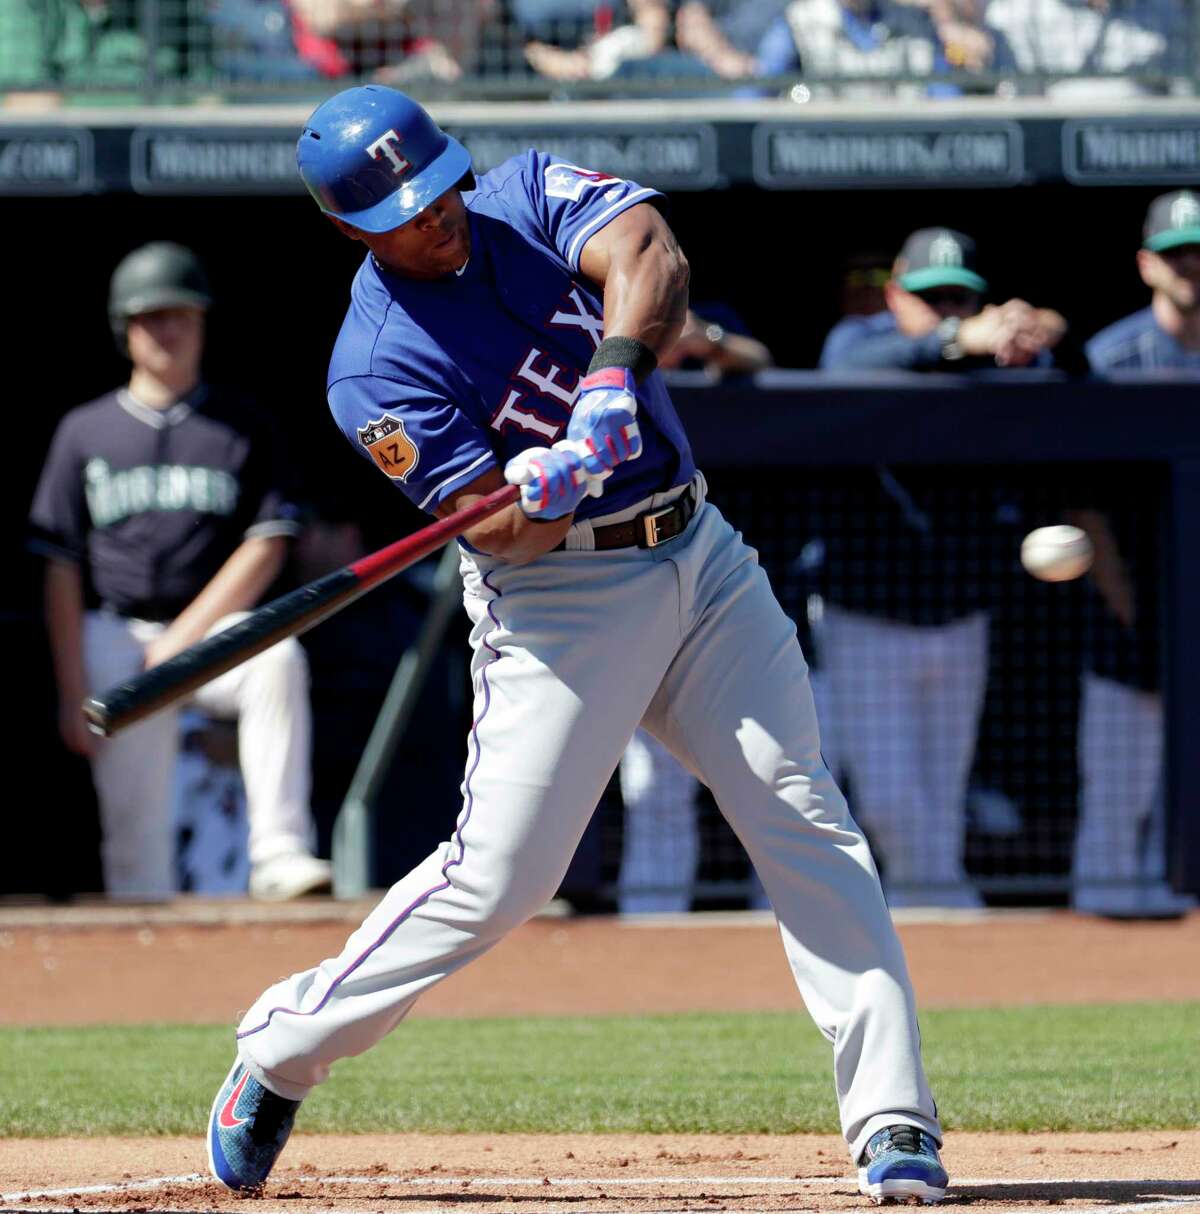 Adrian Beltre wants to finish his career with the Rangers